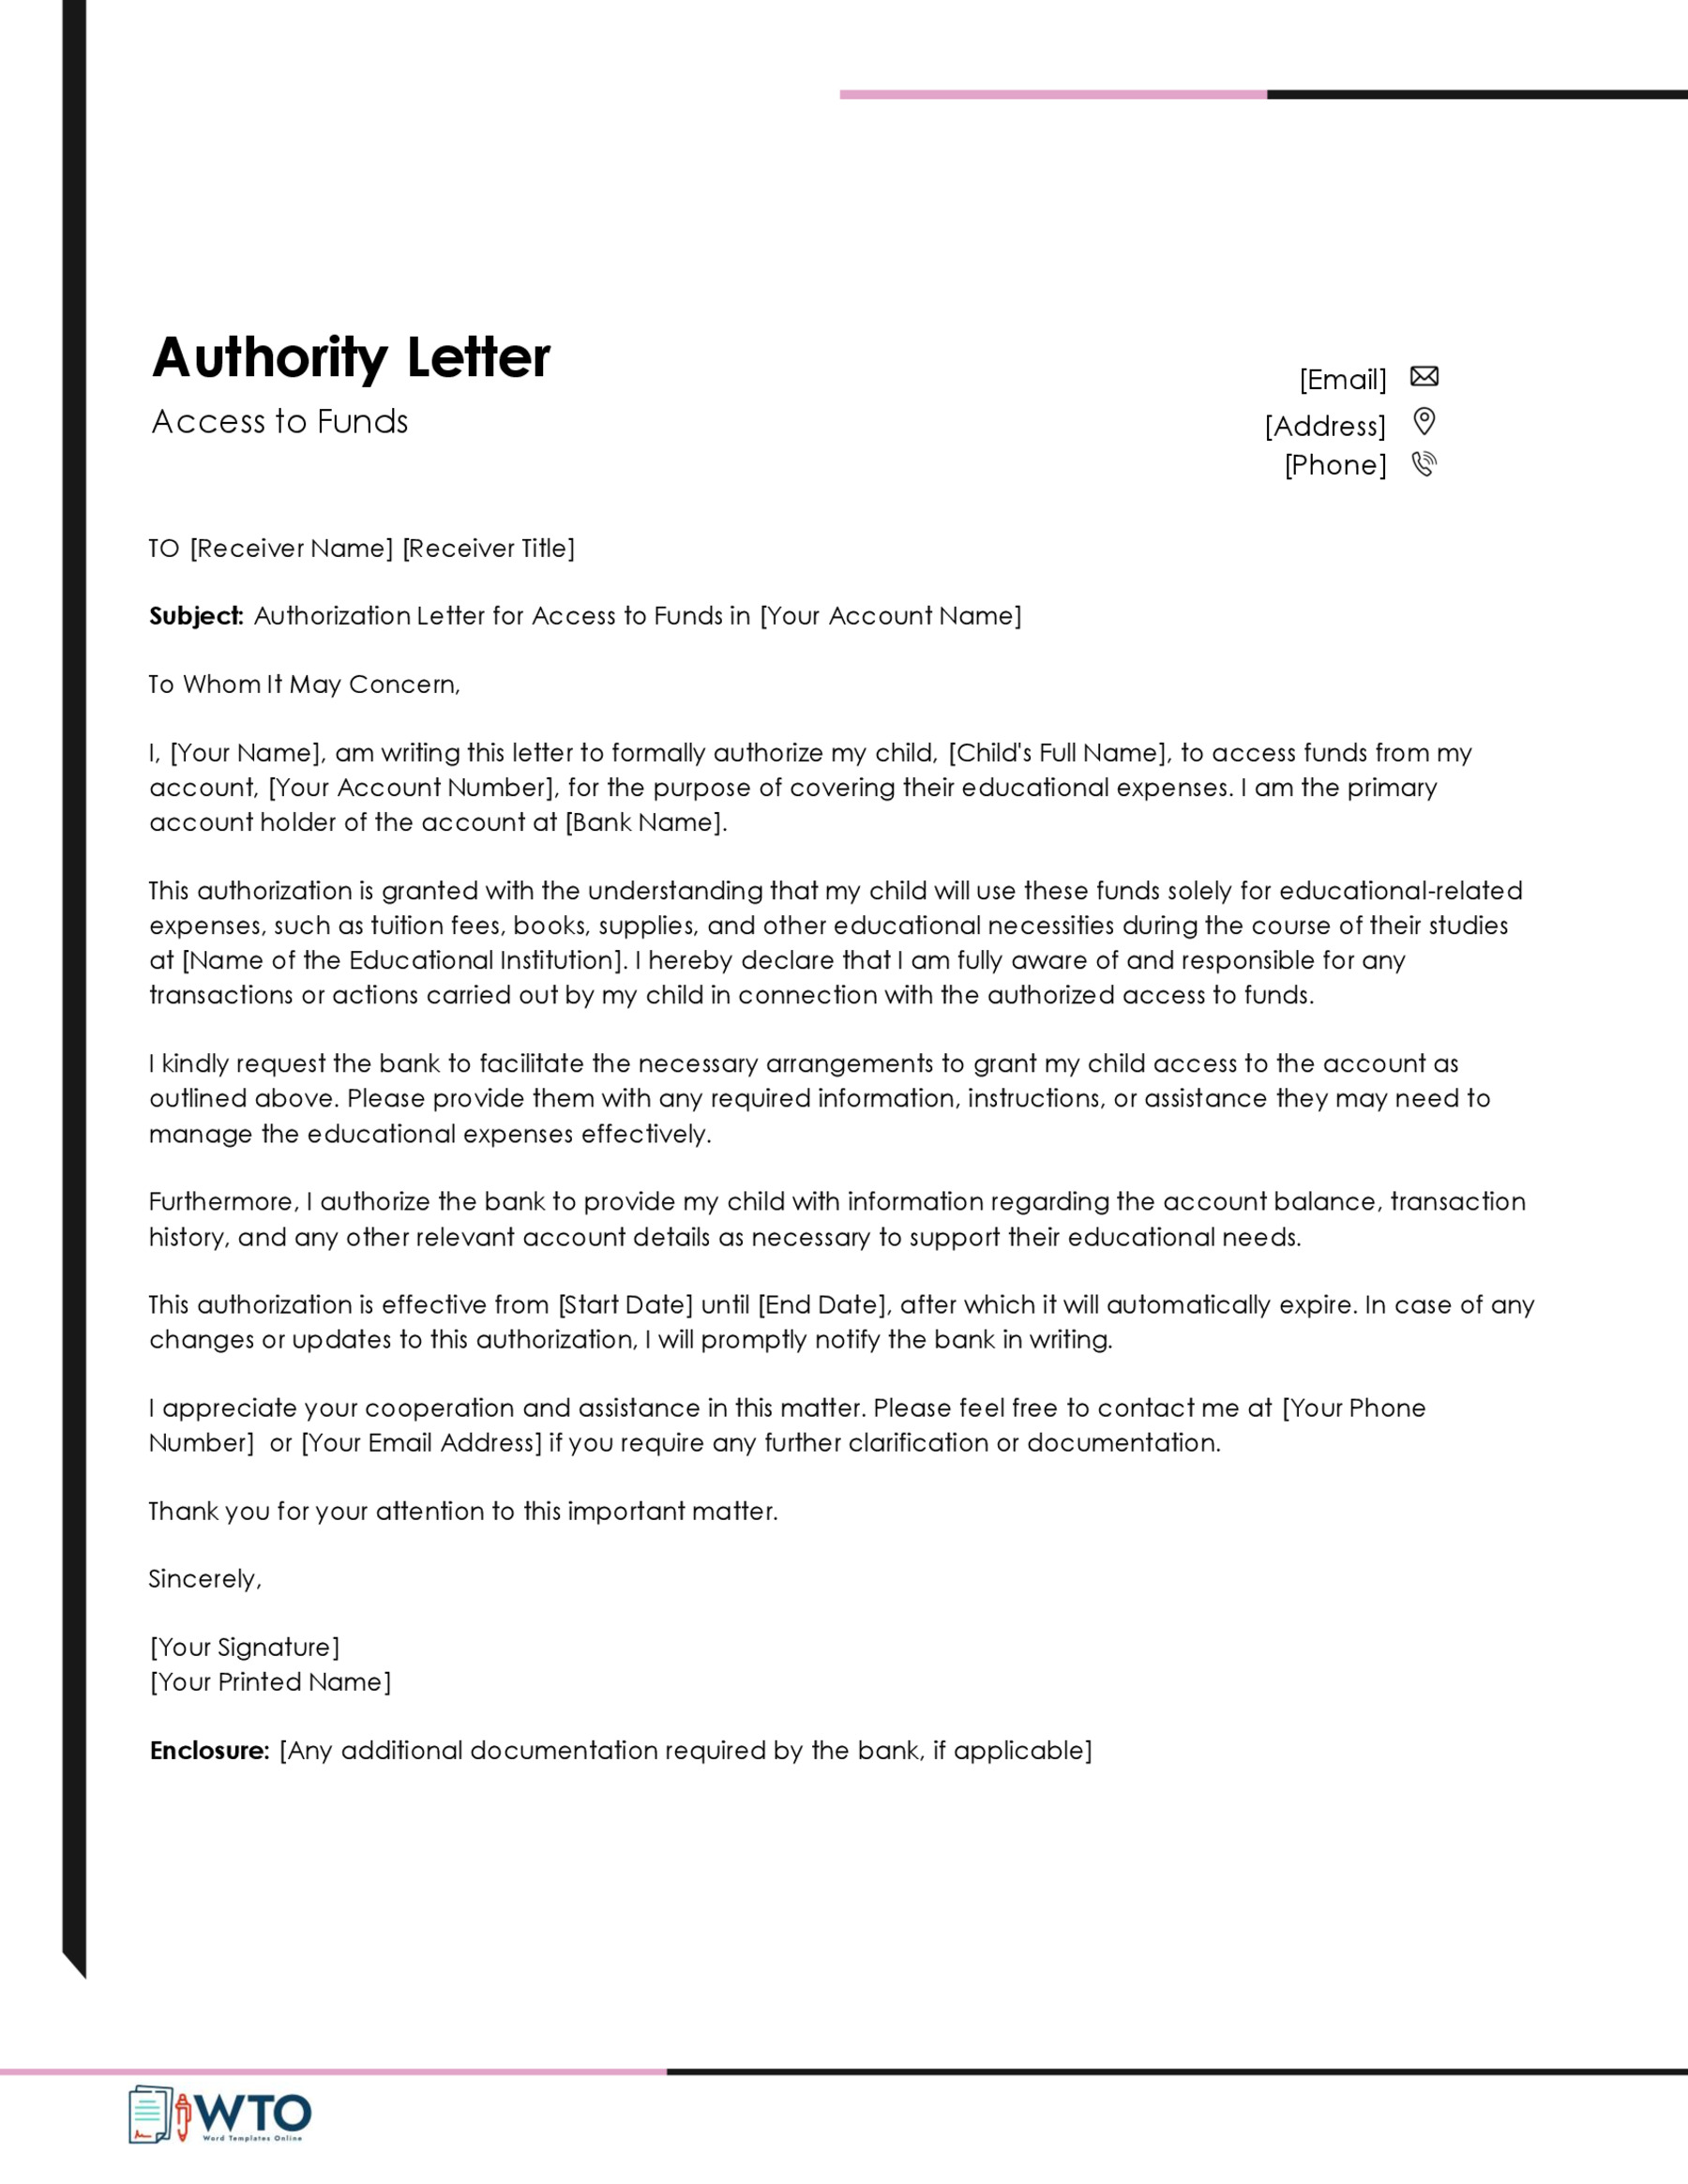 Authorization Letter for Bank Template-Downloadable word format